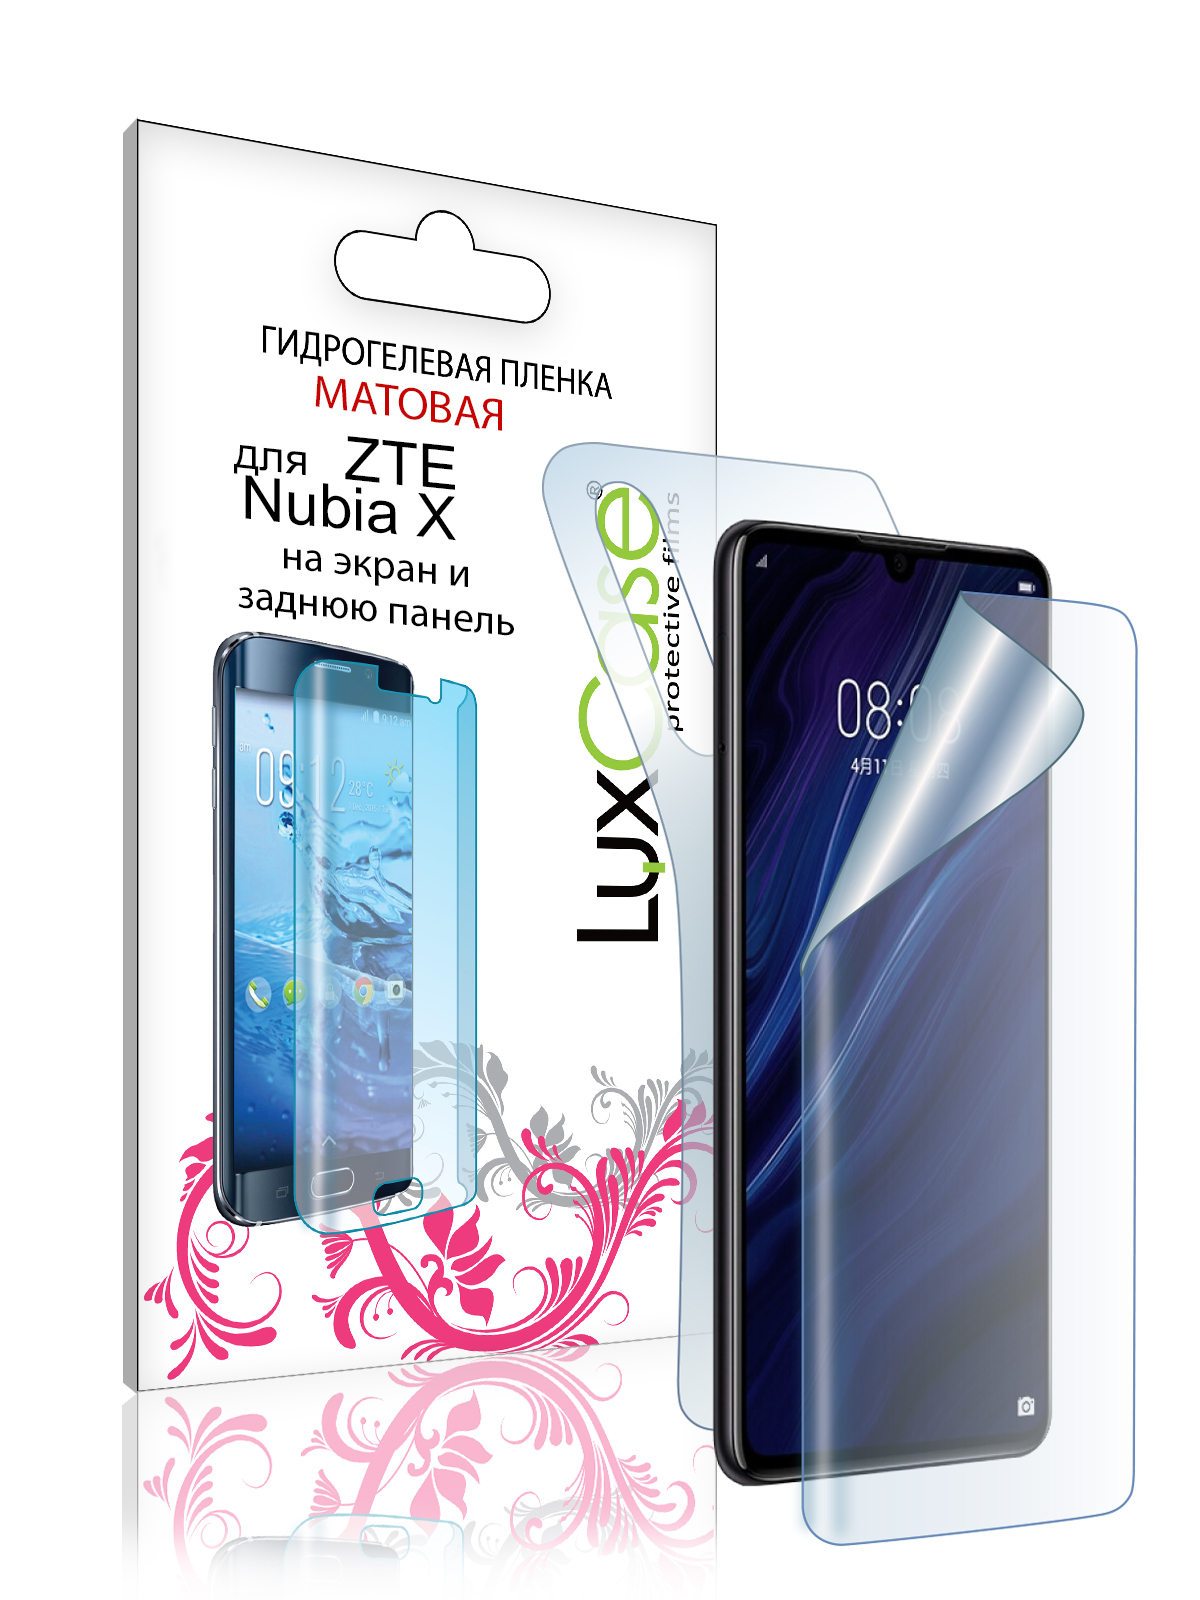 гидрогелевая пленка luxcase для zte nubia x 0 14mm matte front and back transparent 87675 Гидрогелевая пленка LuxCase для ZTE Nubia X 0.14mm Matte Front and Back Transparent 87675